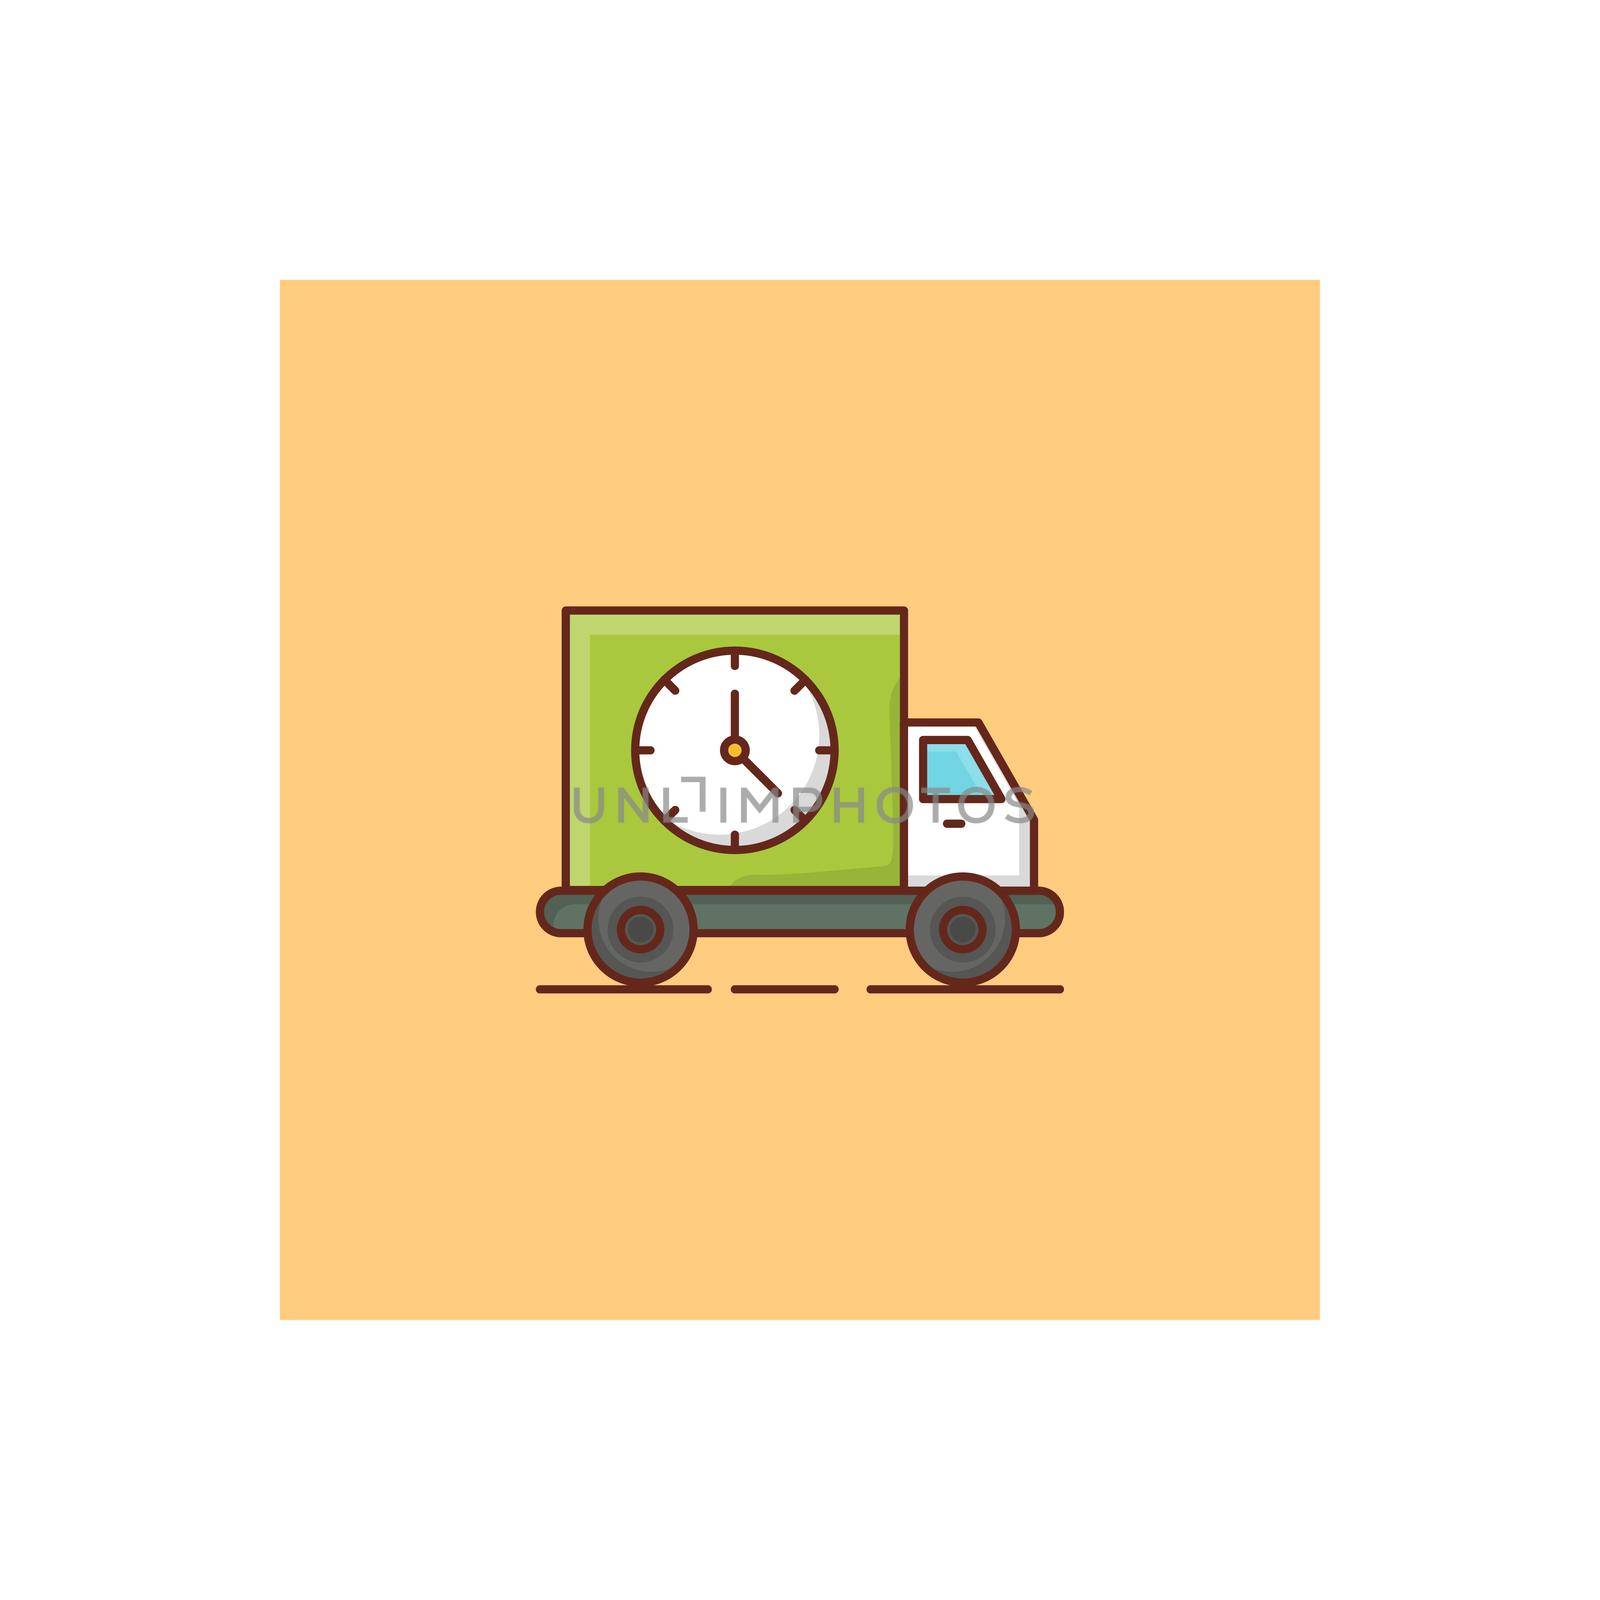 fast by FlaticonsDesign